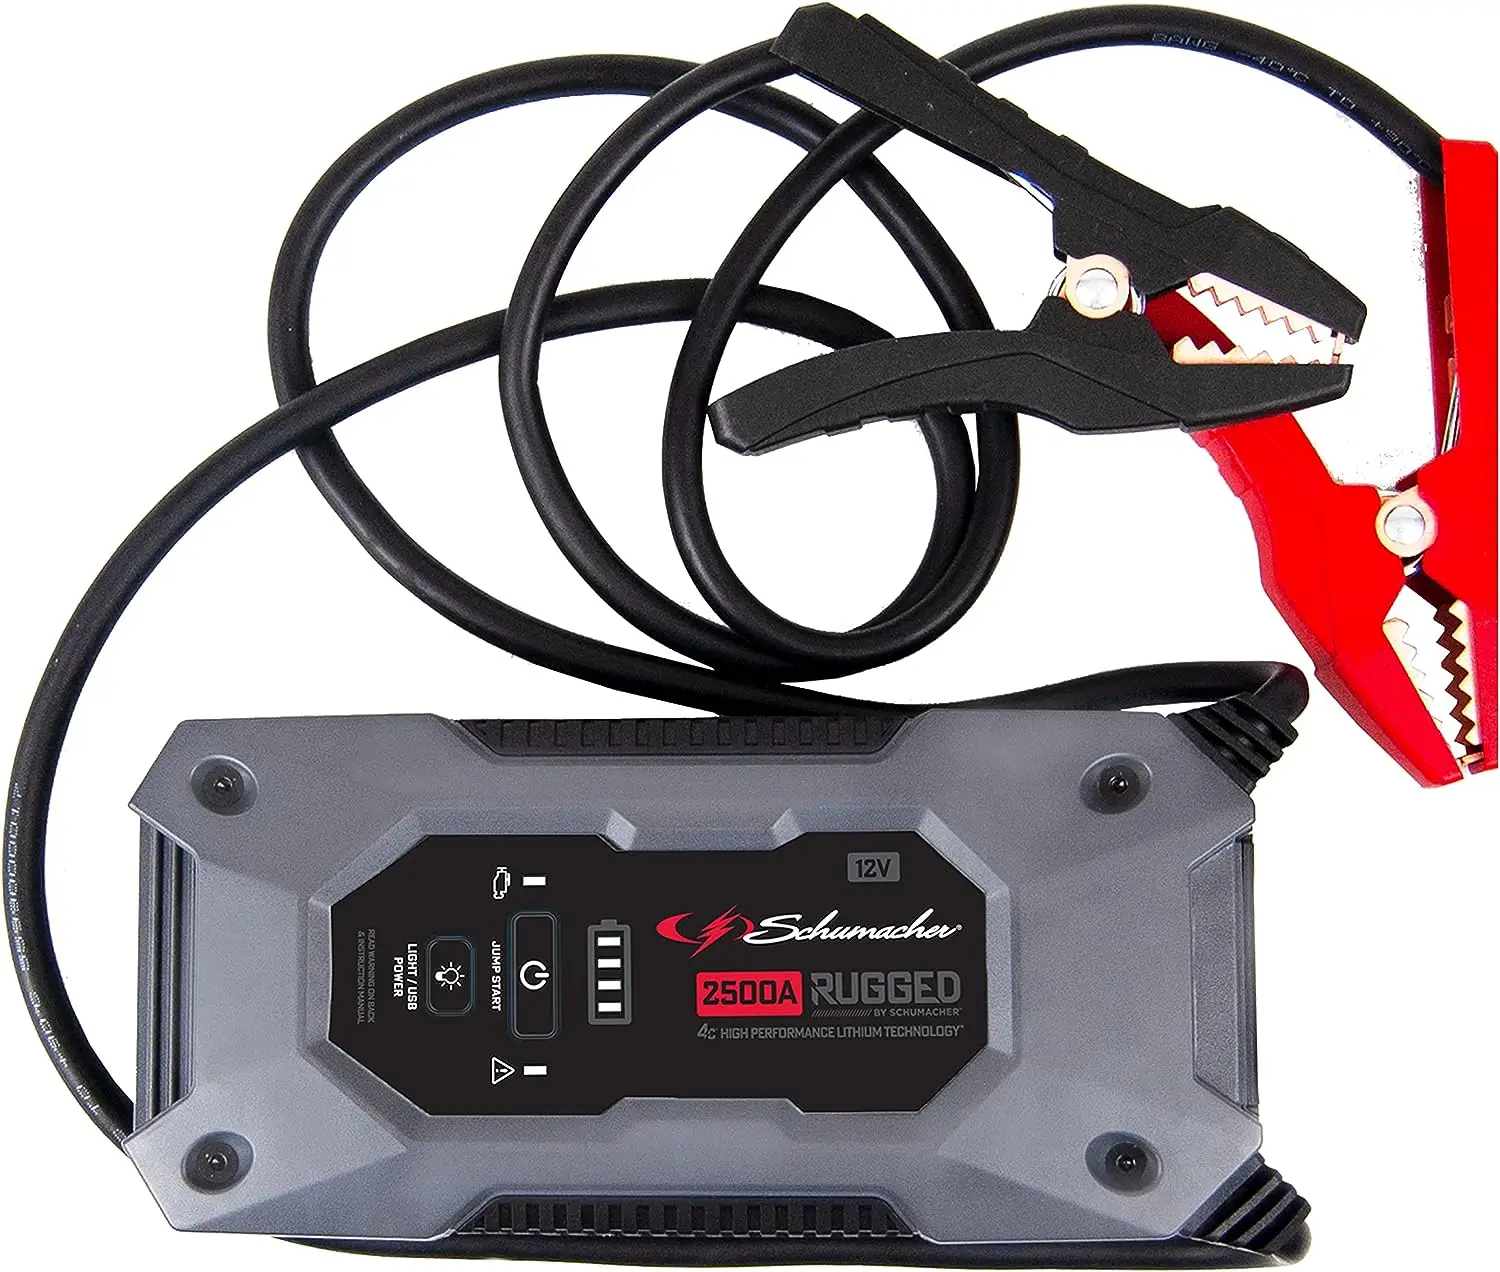 https://ae01.alicdn.com/kf/Sf3c682d4cc9d4309a7ceb2e8cf1d422ft/Rugged-Lithium-by-Portable-Power-Pack-and-2500A-Jump-Starter-u2013-10-0L-Gas-8-0L.jpg